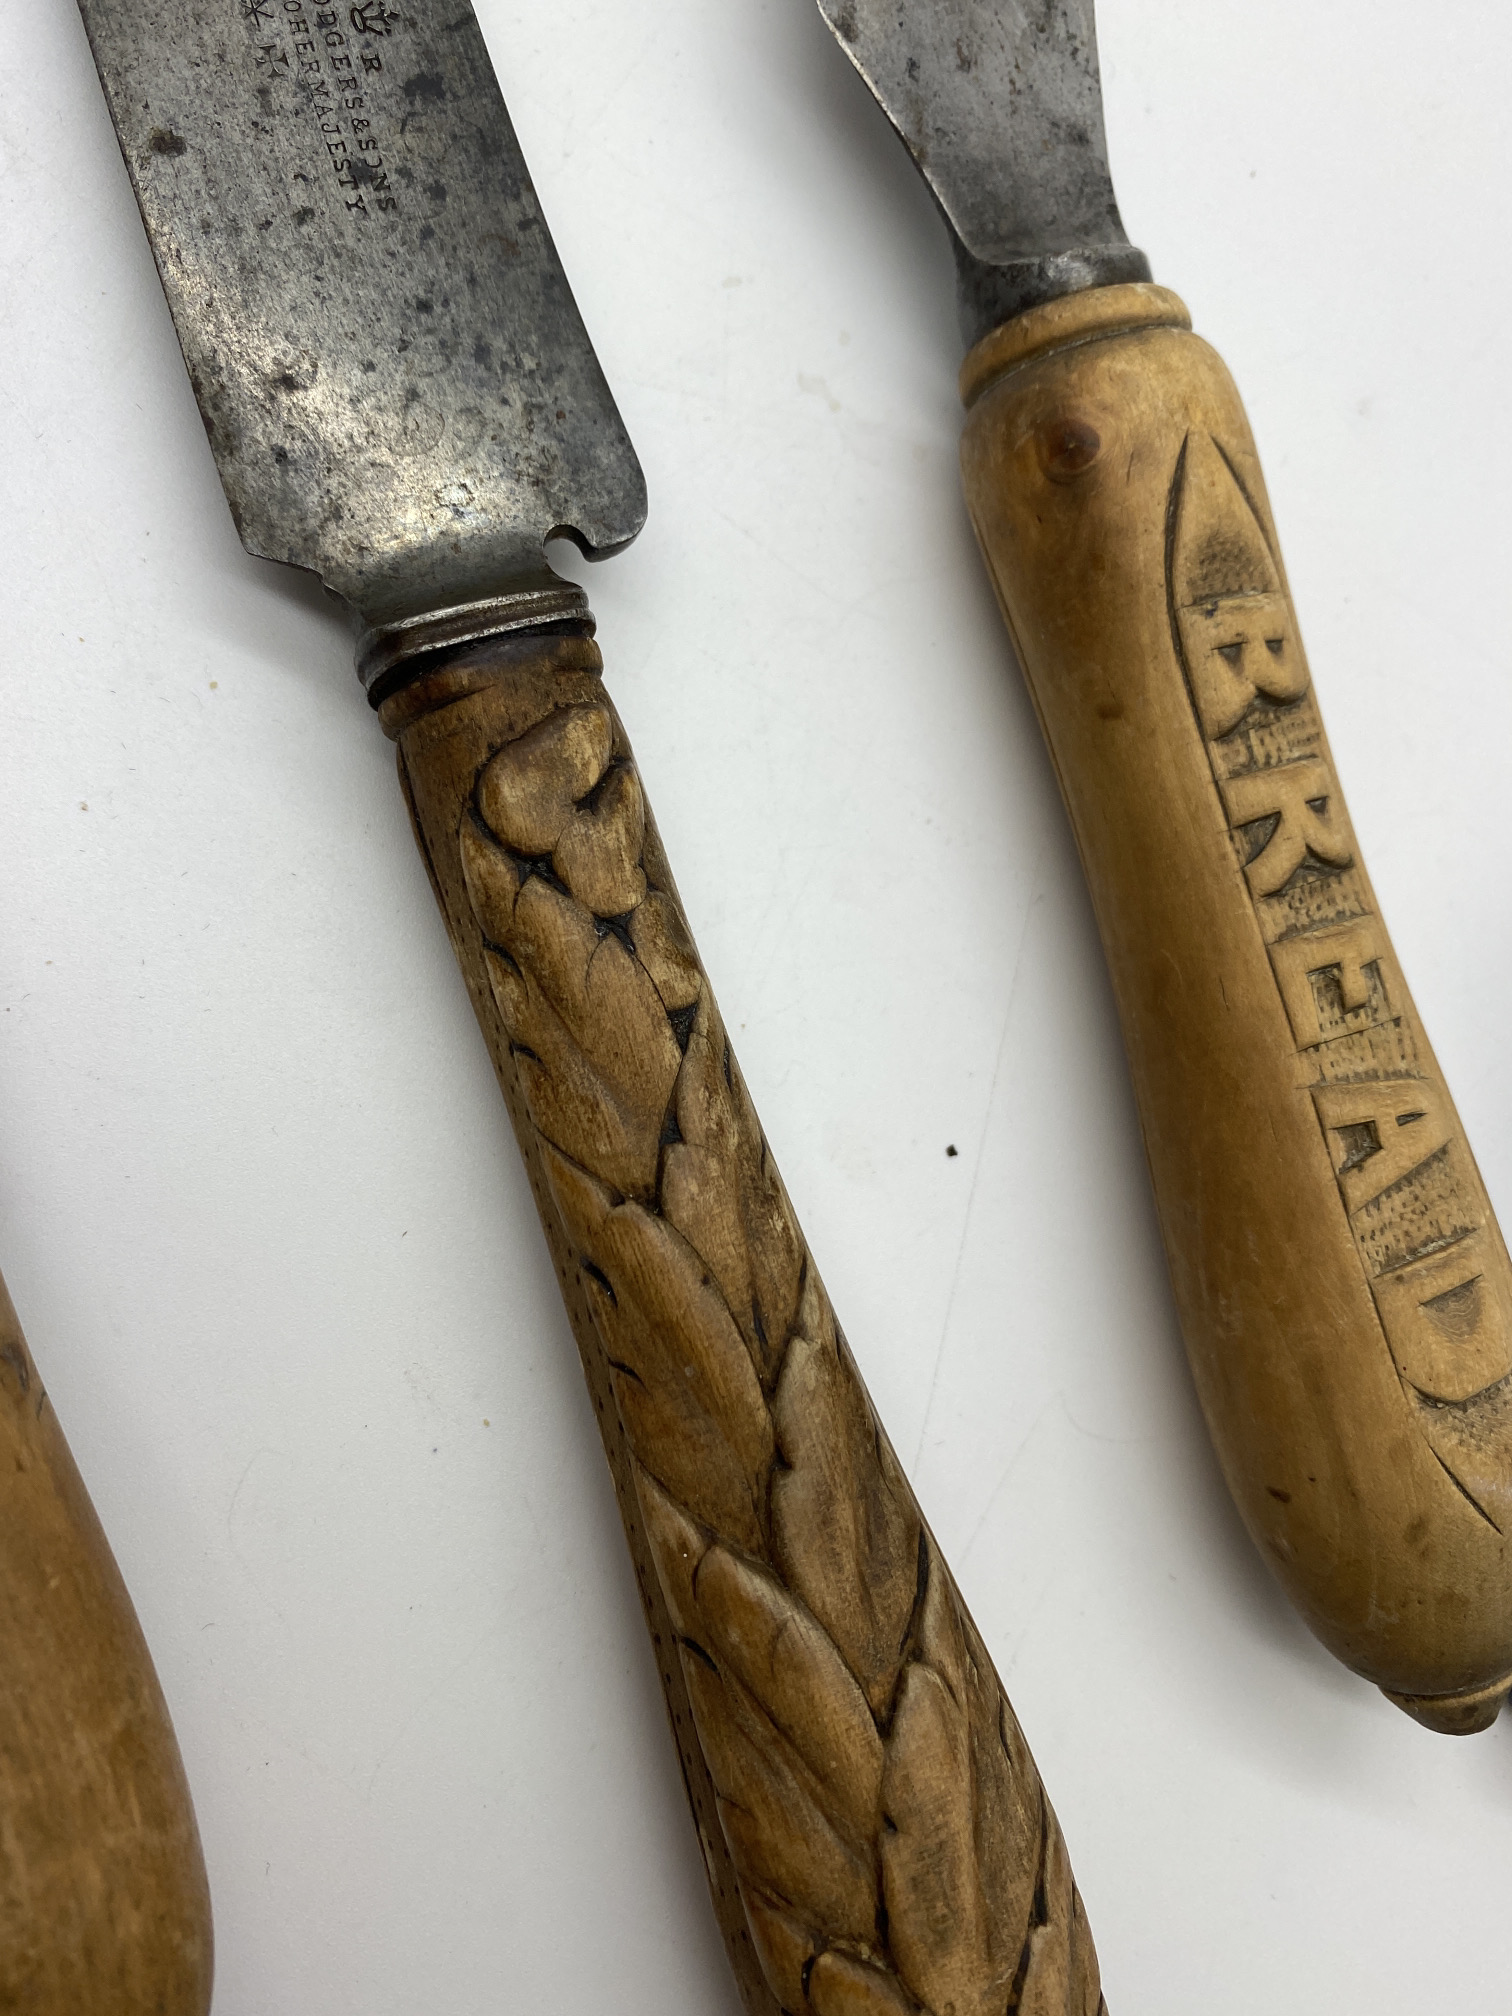 5 x ANTIQUE 1930's BREAD KNIVES INCLUDING HOVIS & BREAD - INC JOSEPH RODGERS - WHEAT SHEAF ETC - Image 9 of 14